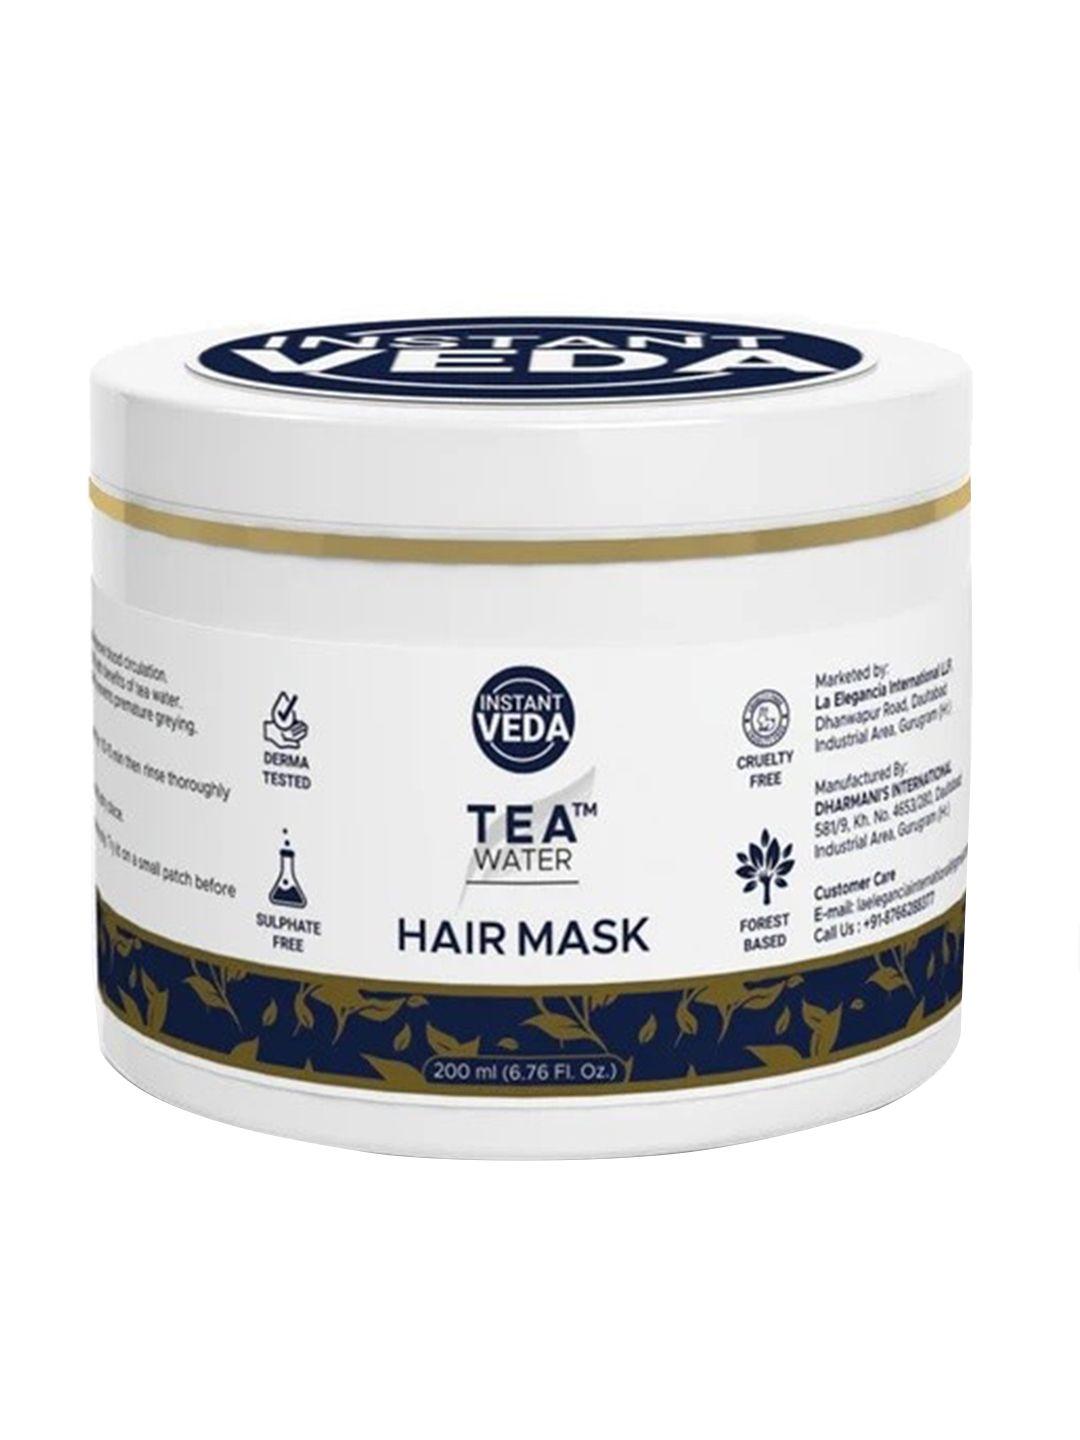 instant veda tea water hair mask for intense hair treatment - 200 ml